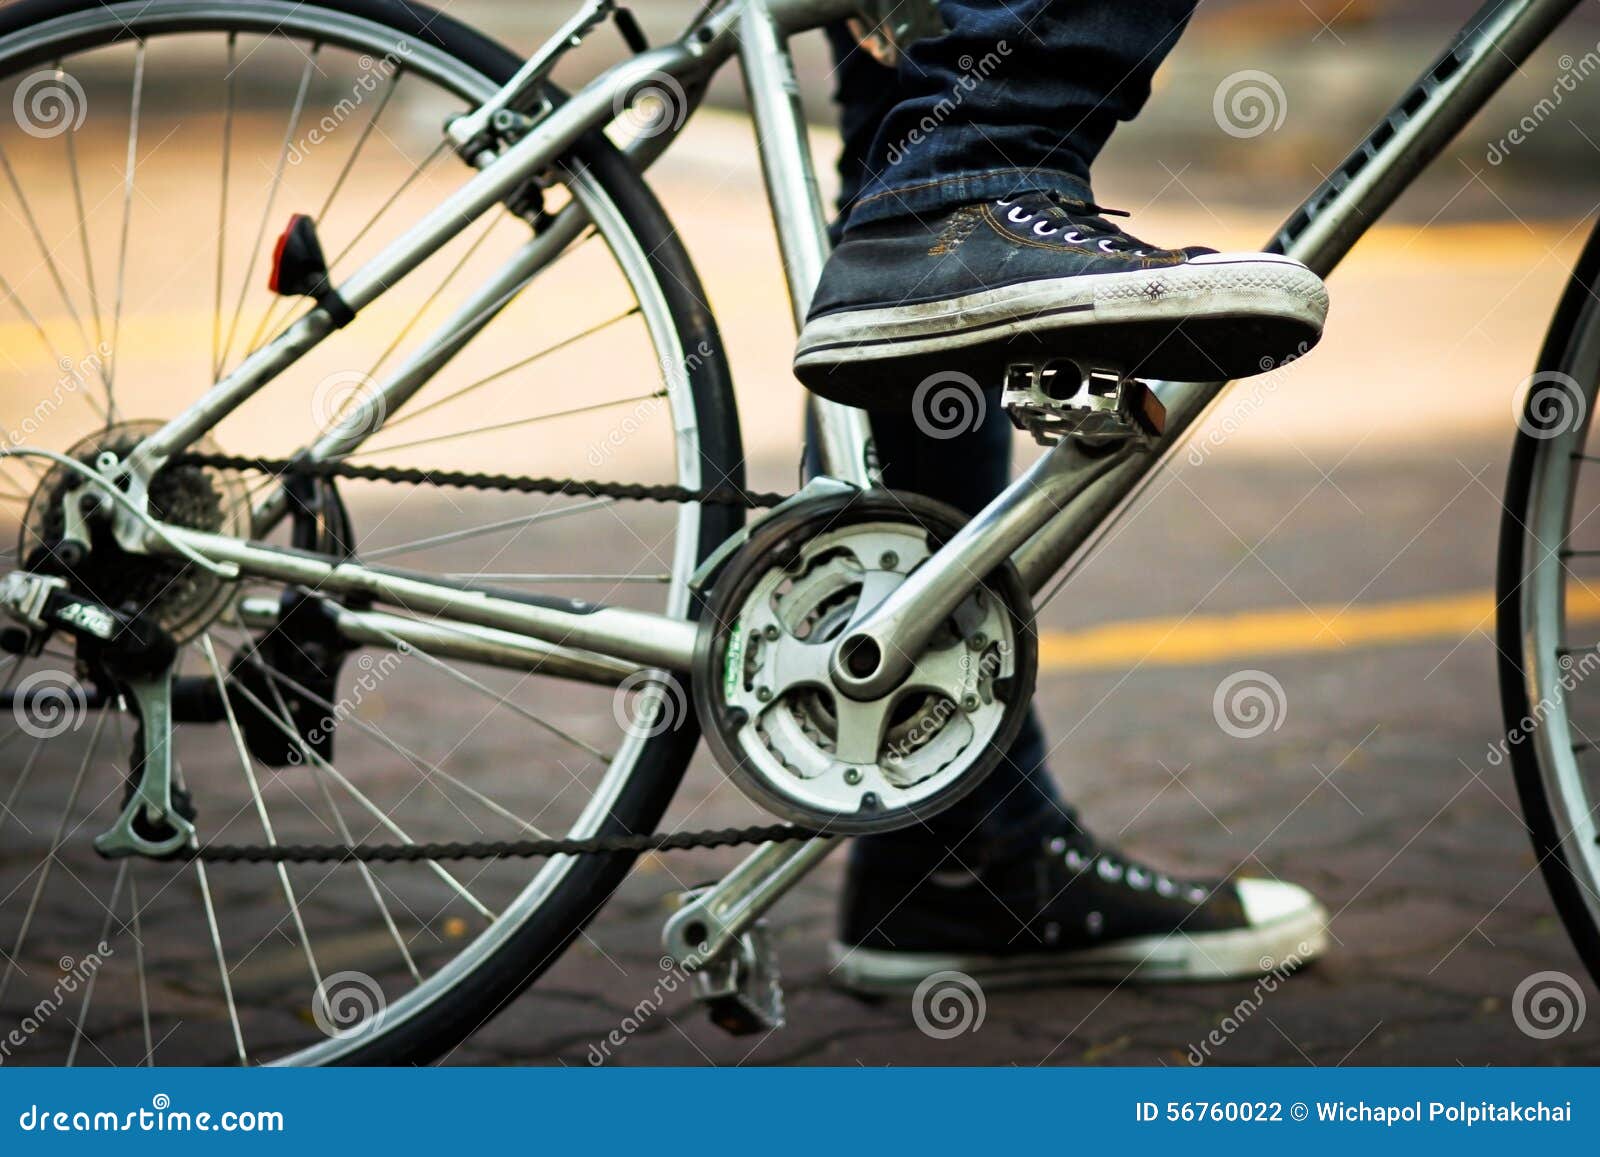 pedal of bicycle